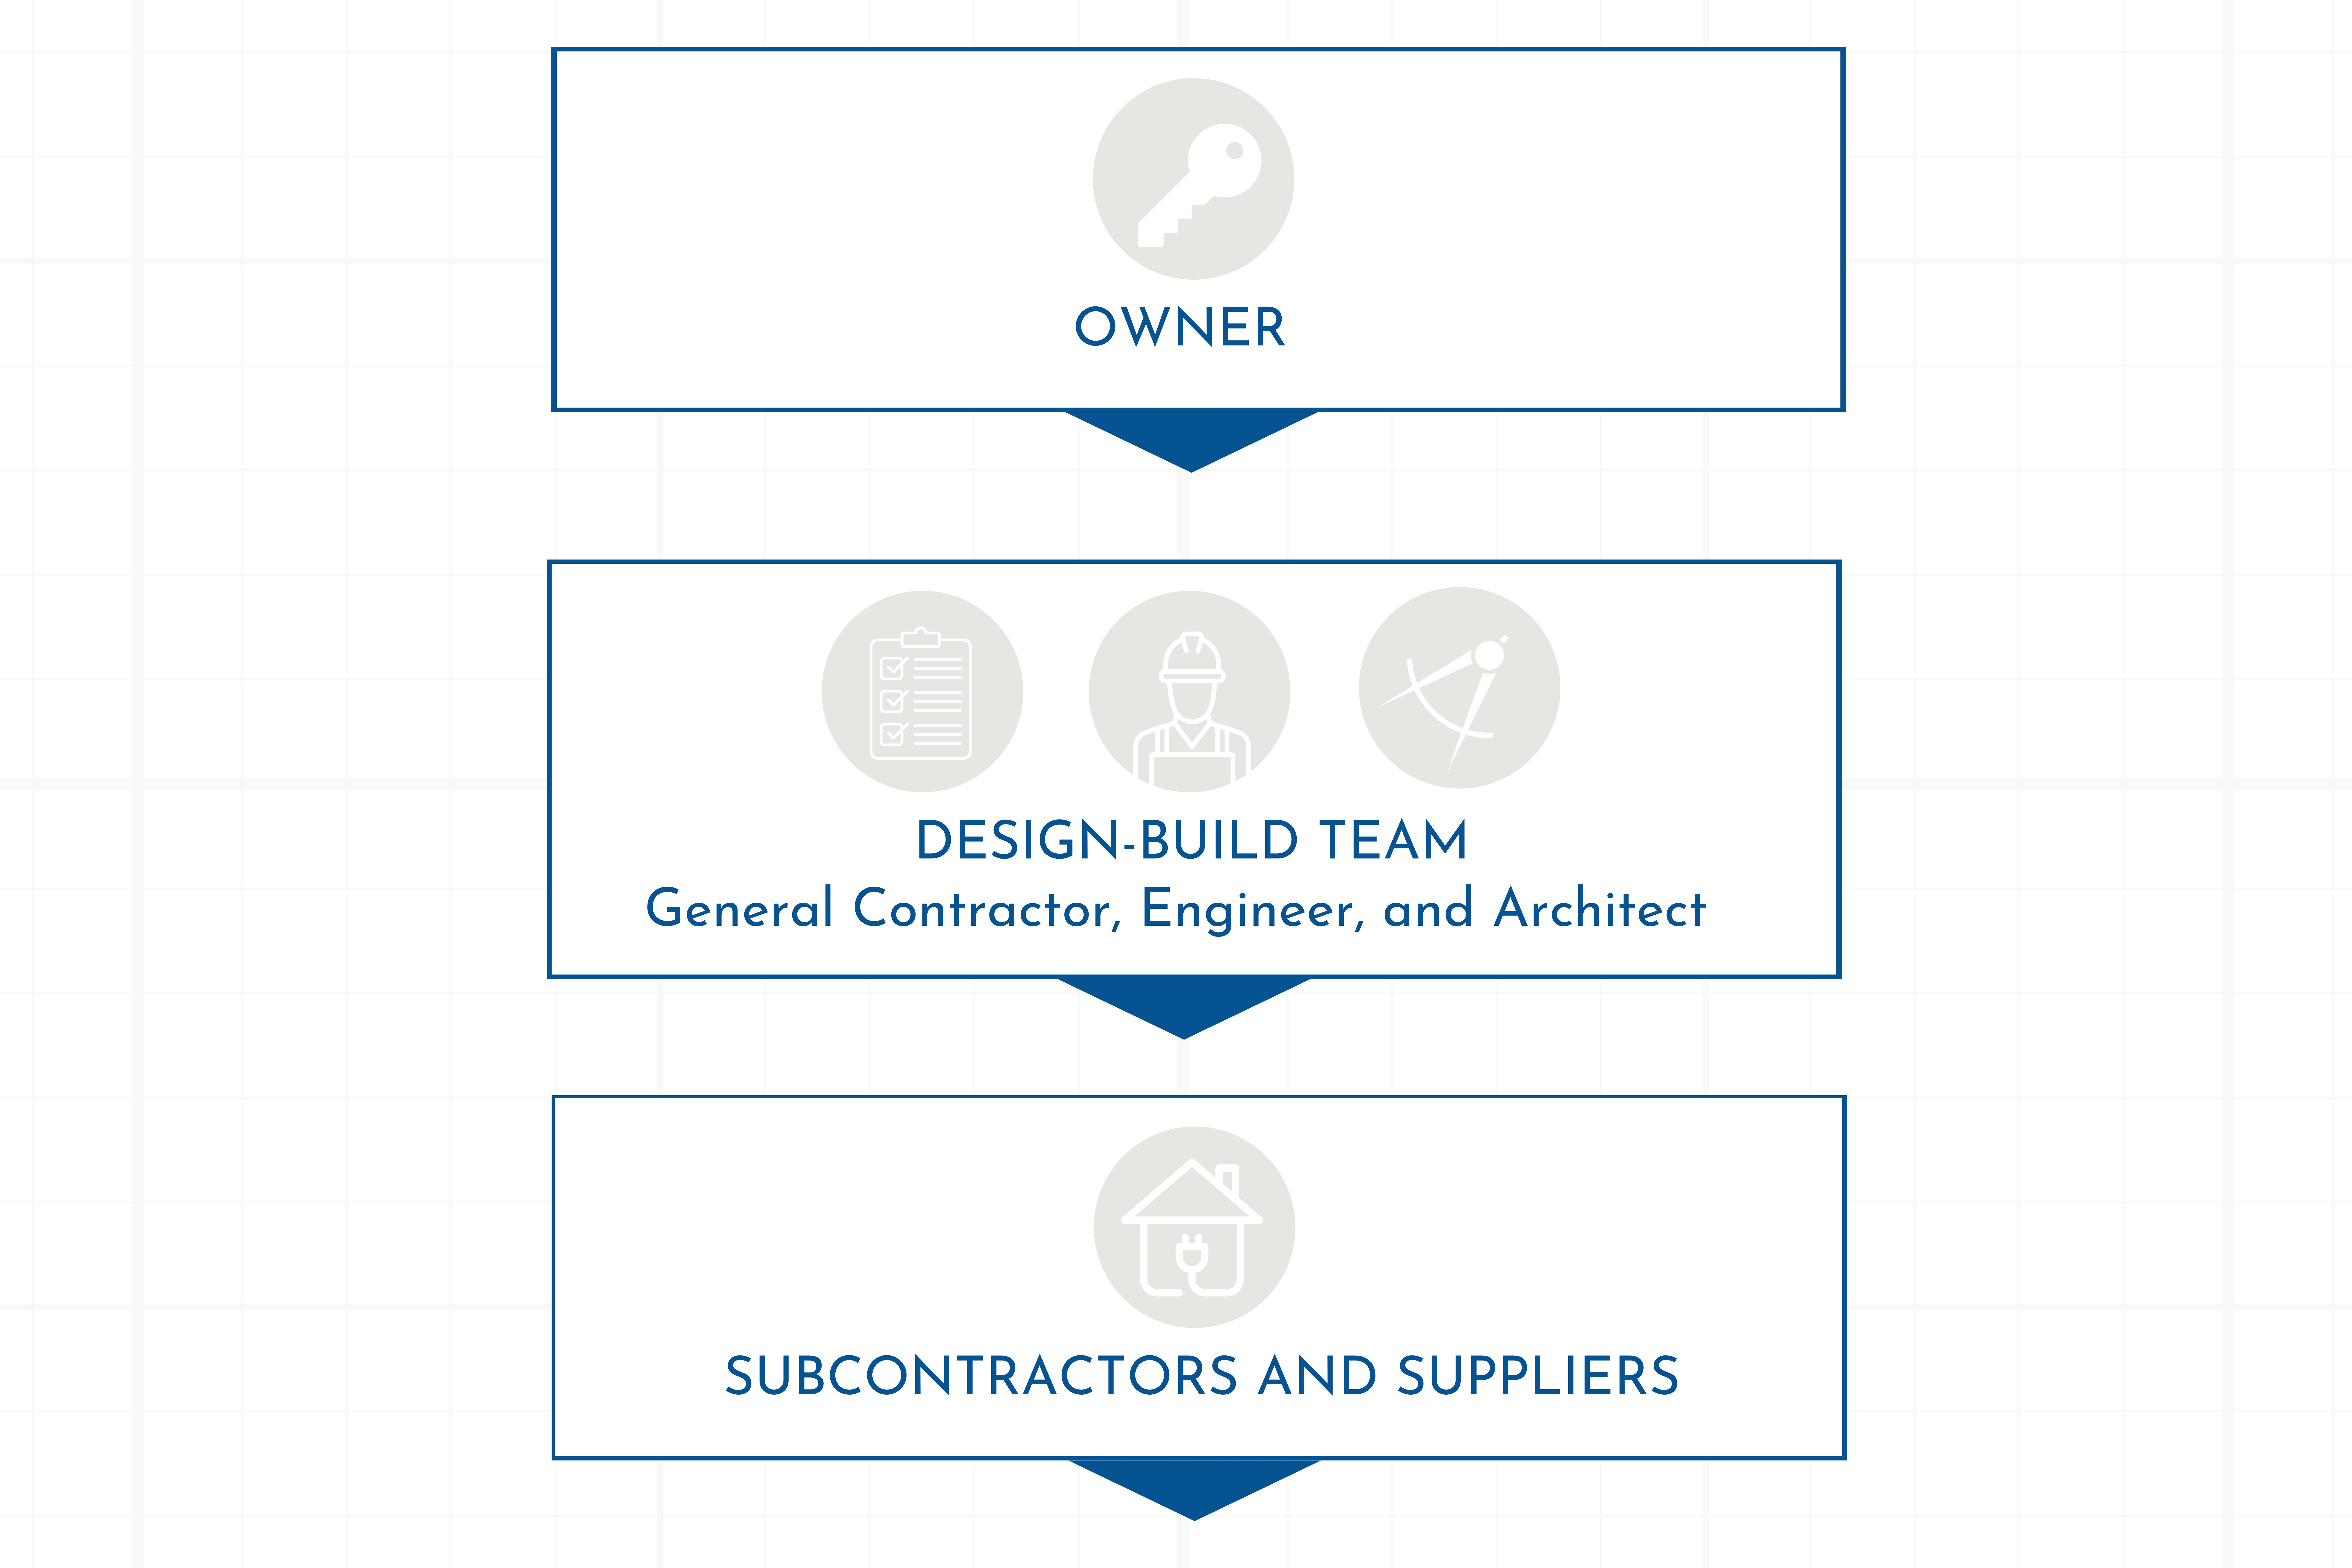 Visual representation of the design-build method, illustrating a streamlined process for construction projects. The graphic showcases collaboration between designers, architects, engineers, and builders from concept development to final completion. Arrows and labels indicate the integrated workflow, emphasizing efficiency and communication throughout the project lifecycle.